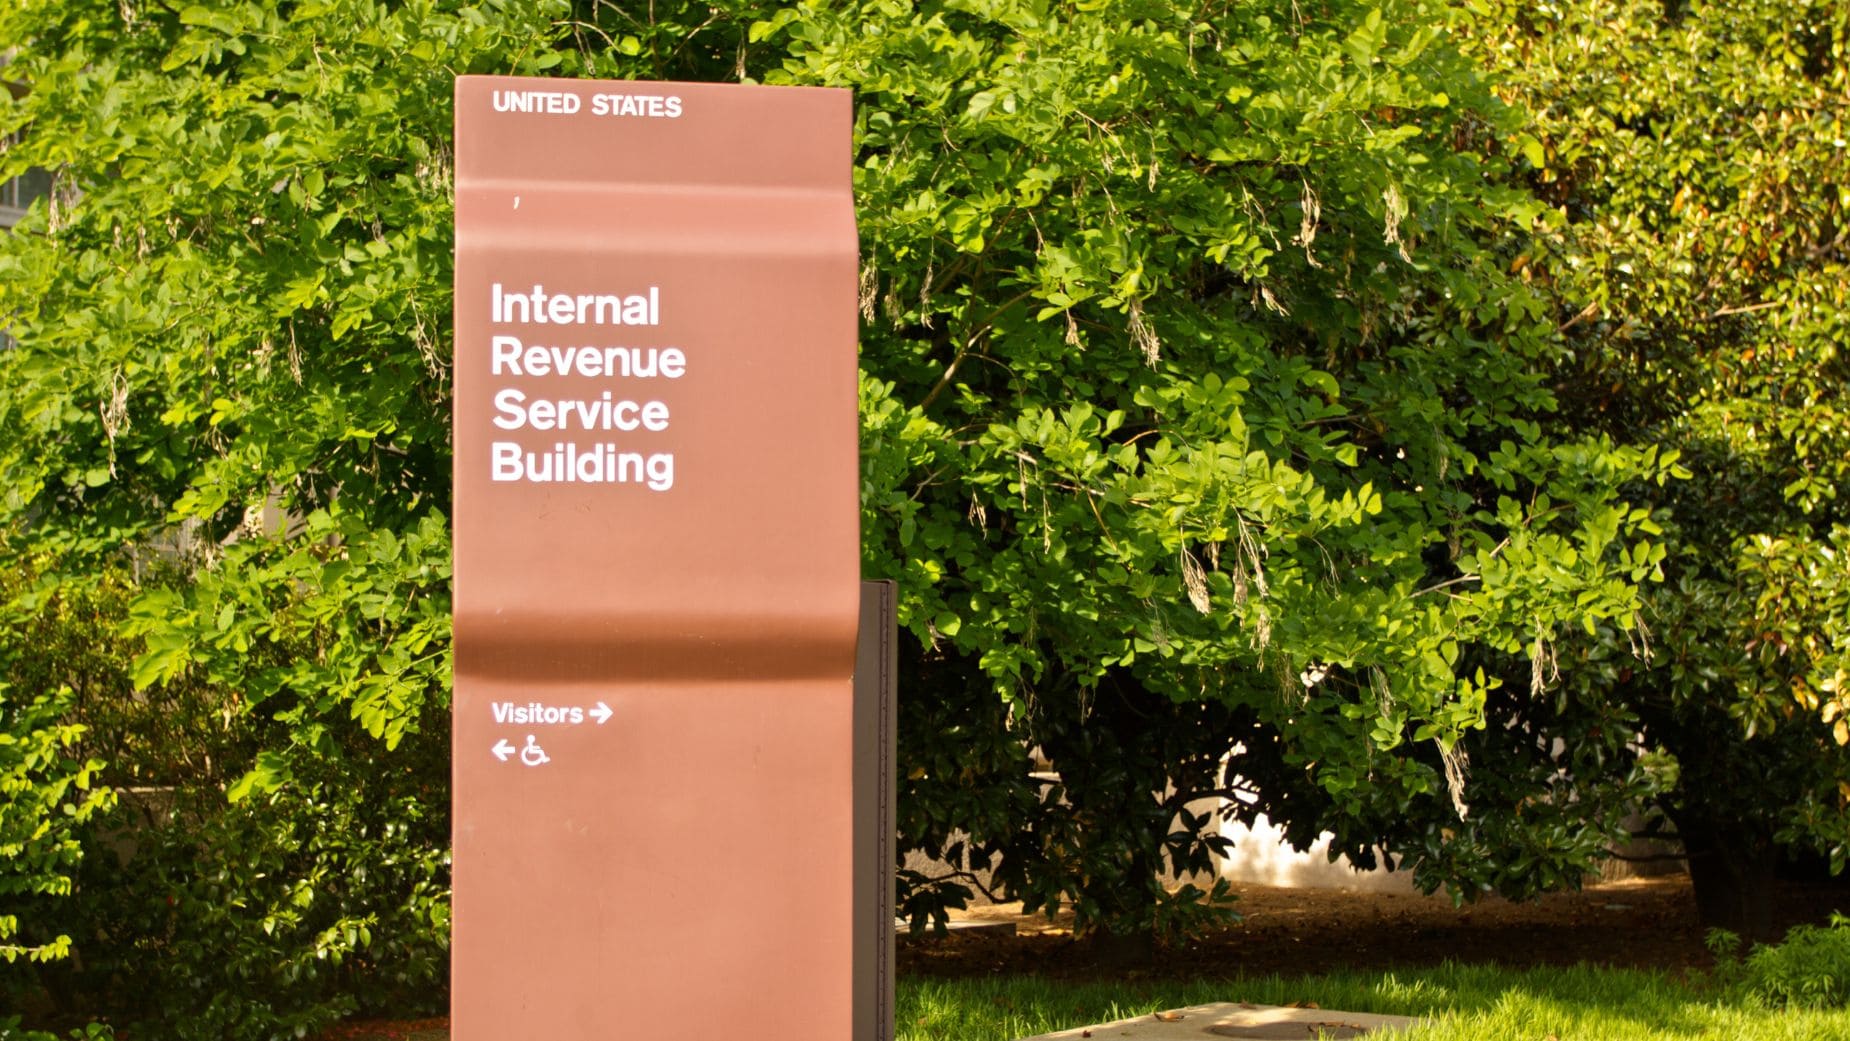 The IRS announces something that is interesting for everyone